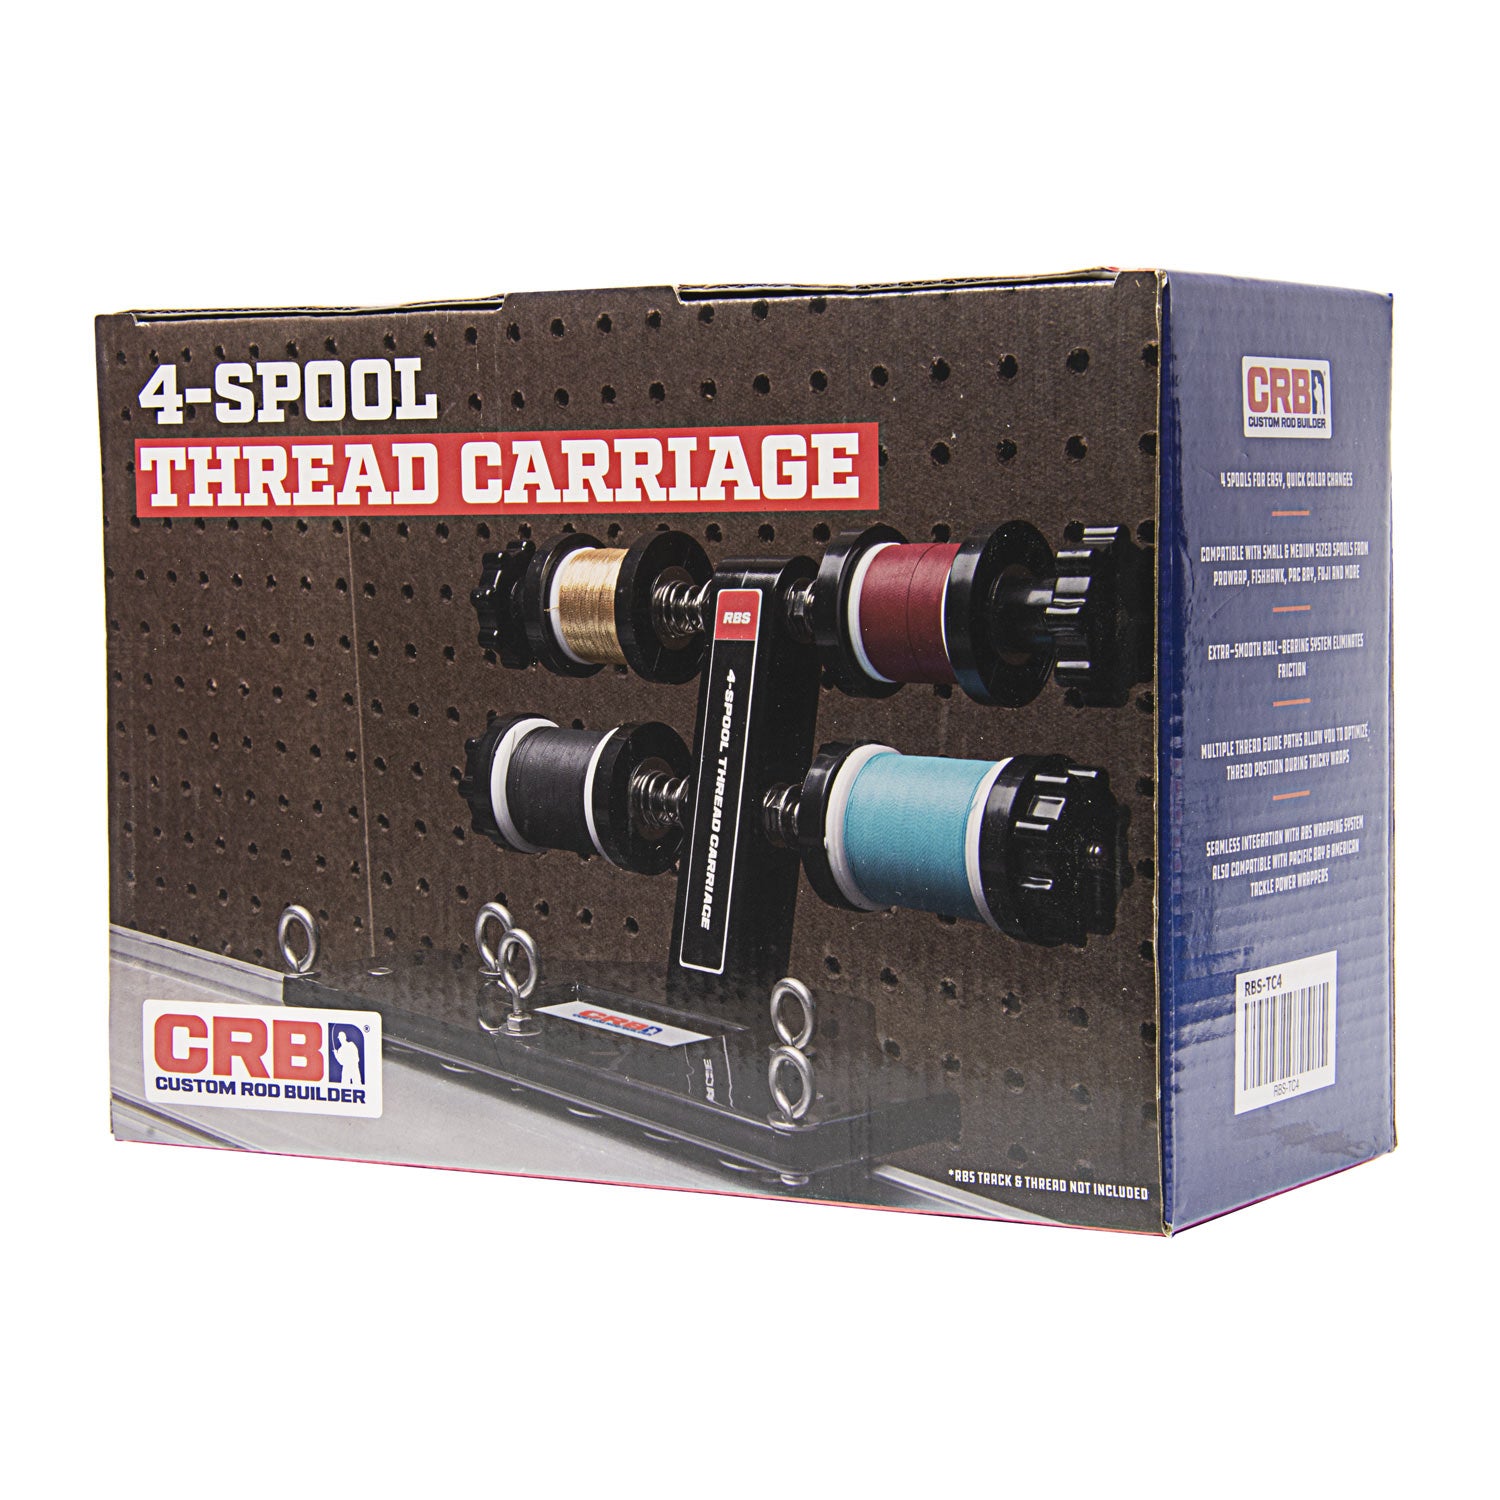 4-Spool Rolling Thread Carriage for RBS